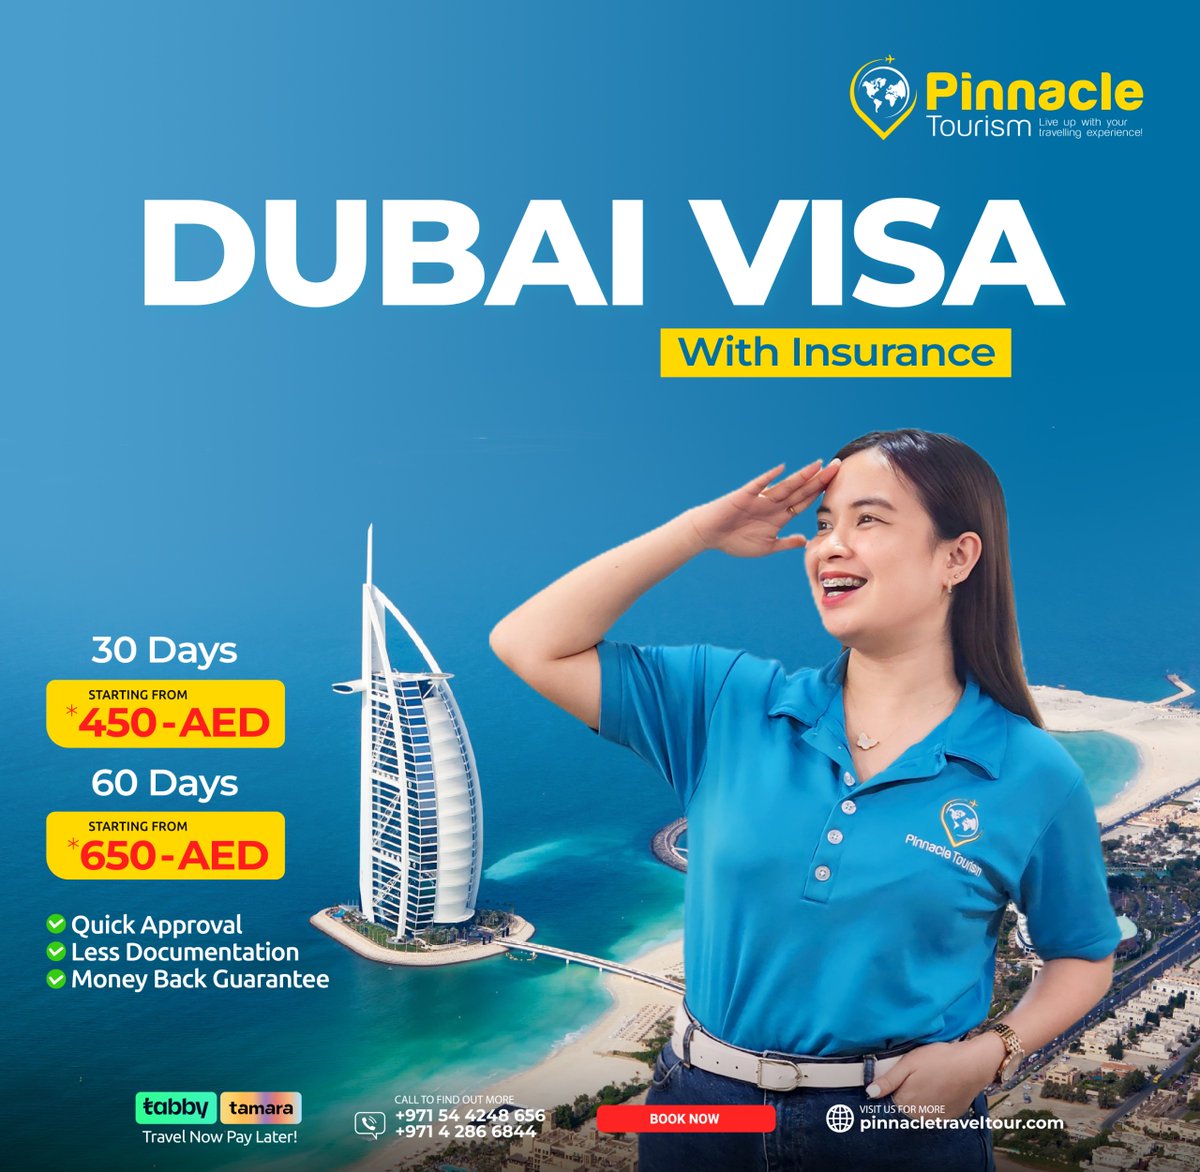 Exclusive hassle-free visit visa packages with insurance coverage for 30 or 60 days from Pinnacle Tourism! 🎉 

☎️042866844
📲0544248656
📧inquiries@pinnacletraveltour.com

#VisitVisa #TravelInsurance #PinnacleTourism #WorryFreeTravel #ExploreTheWorld #UAEvisa #Dubaivisa #visit